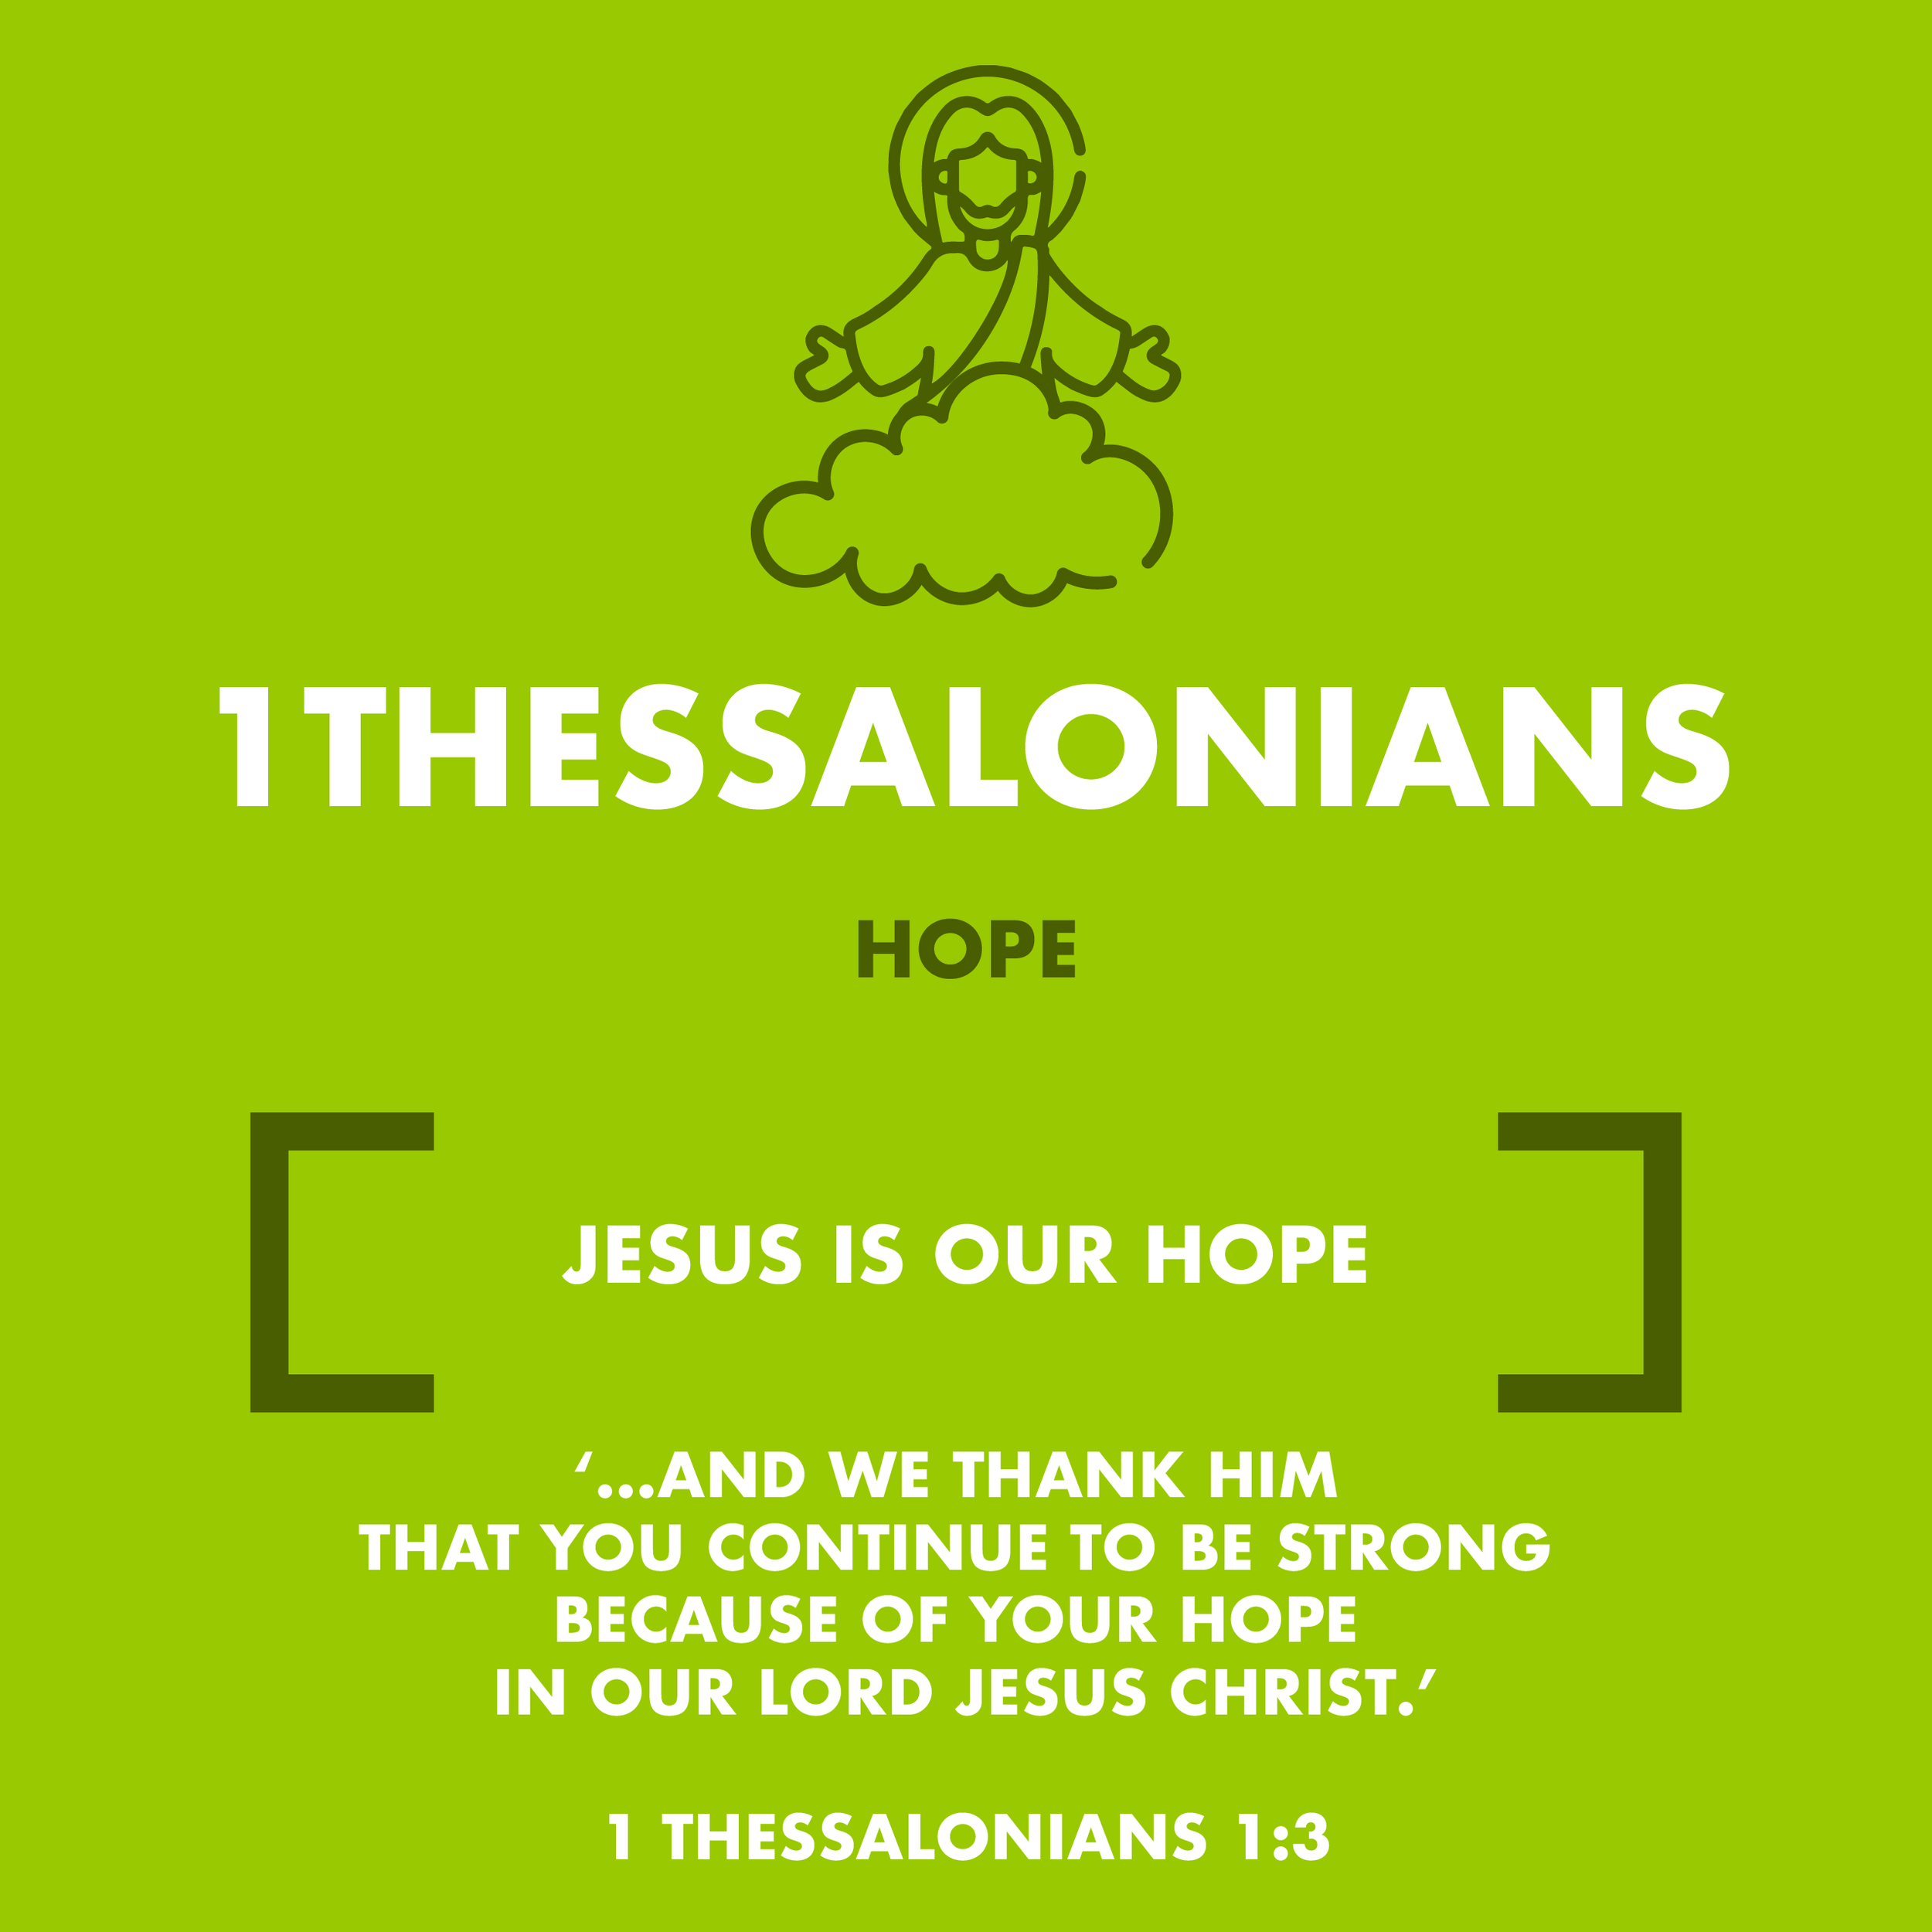 Books of the Bible_posters_50 1Thessalonians.png